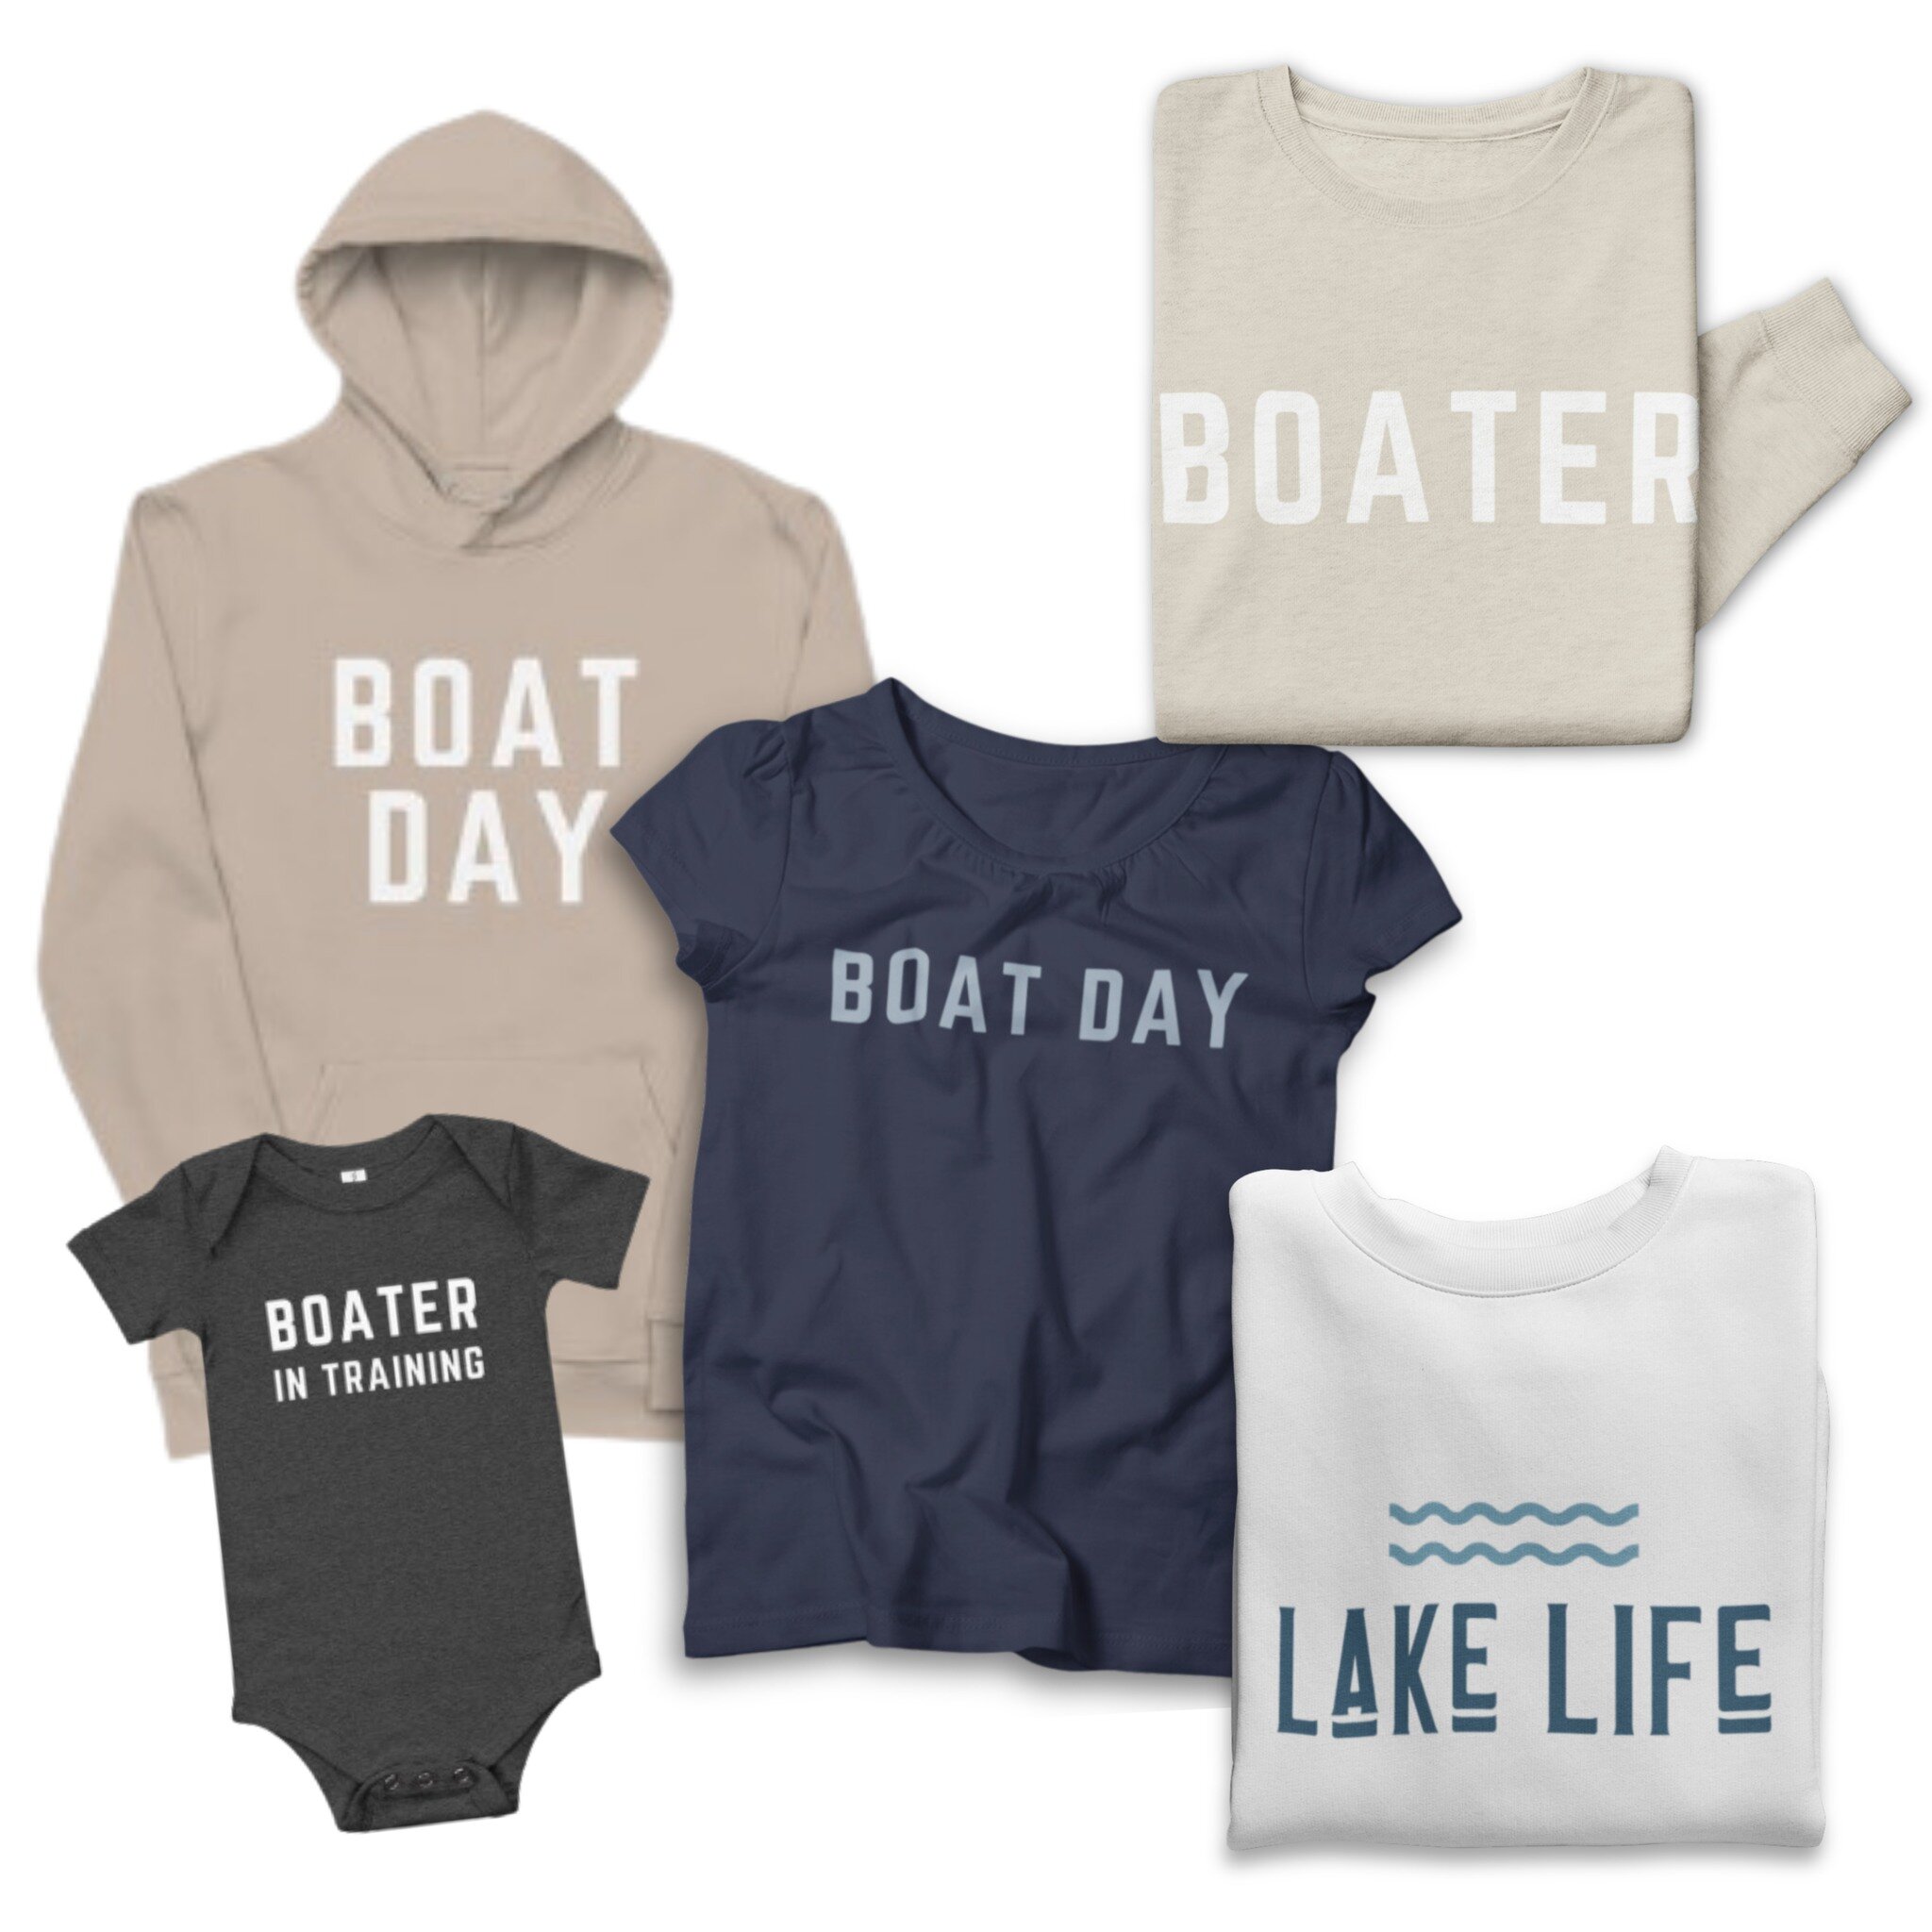 Gifts for all ages of Boaters and Lake Lovers. Get Free Shipping and 15% Off with promo code HOLIDAY15 🛒  lakelifeshop.com

#lakelifeshop #lakelife  #boaters #boater #lake #lakelife